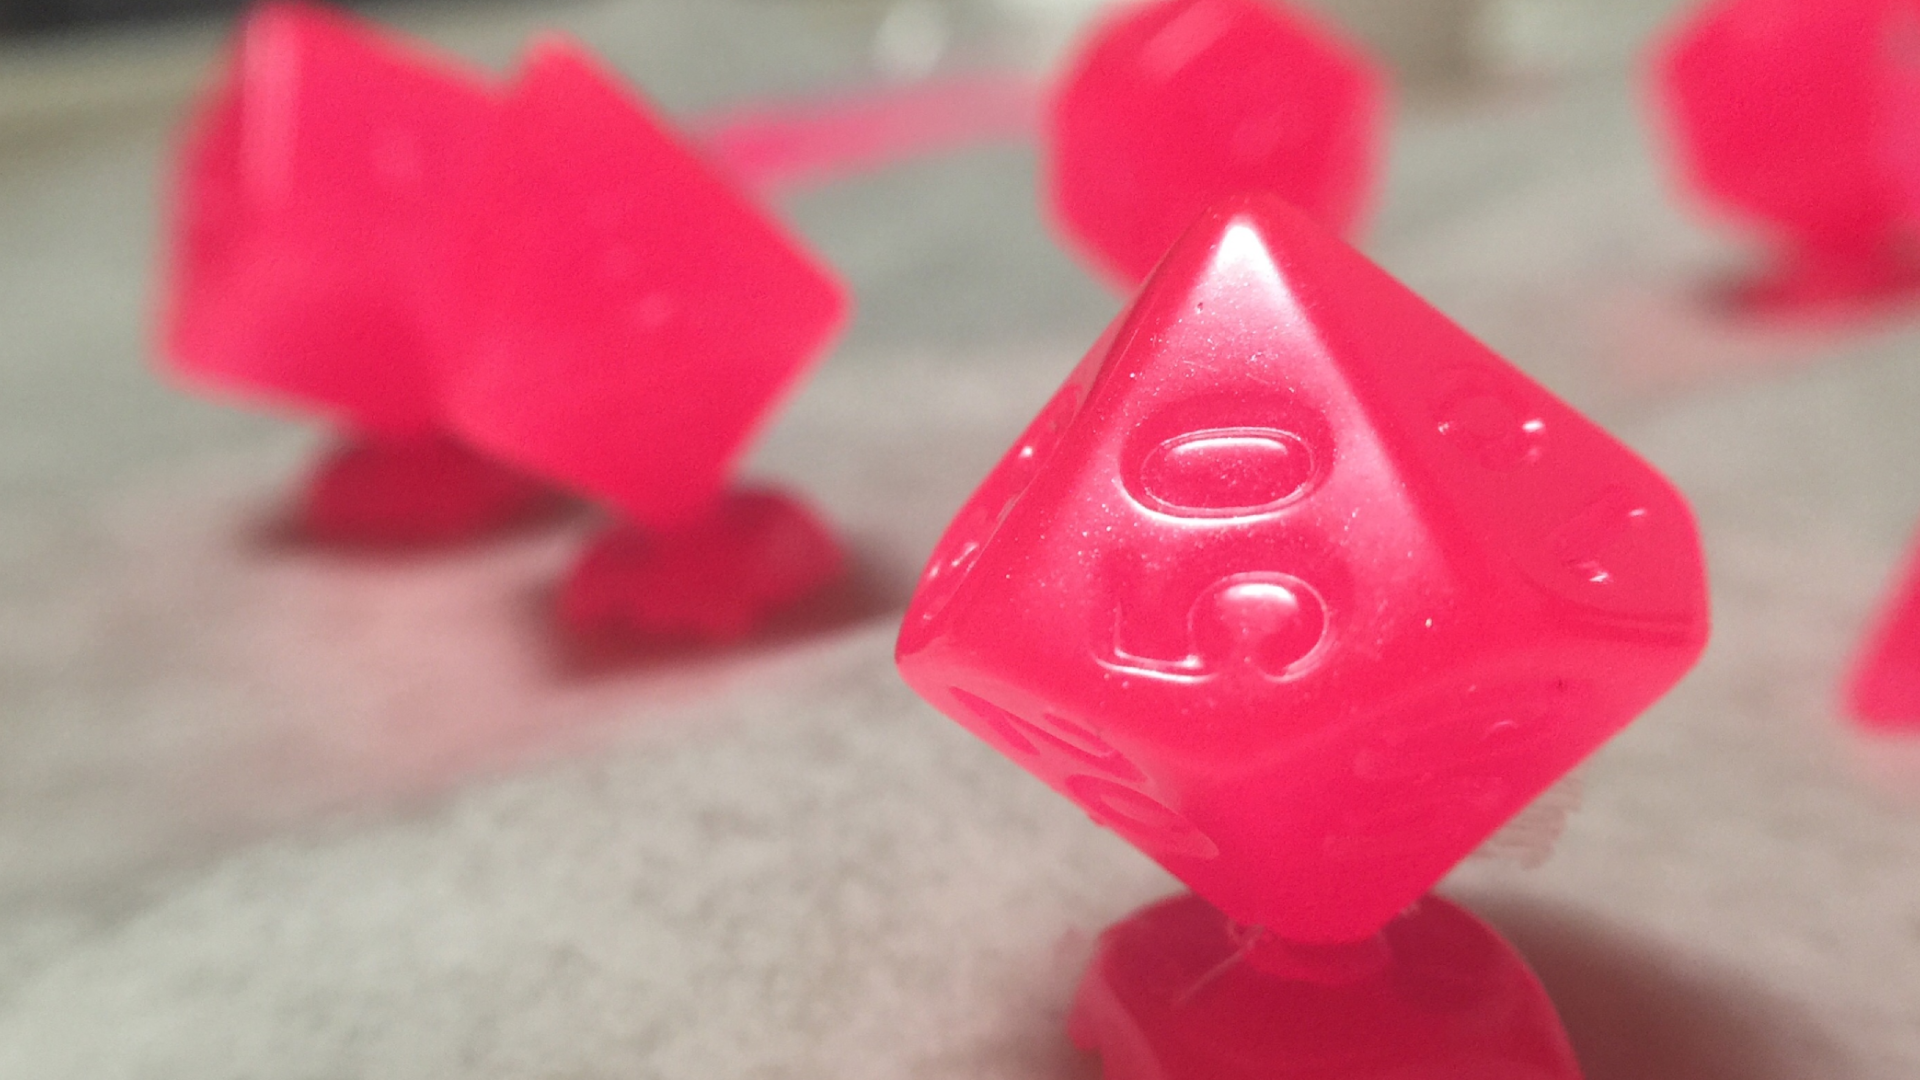 Resin 3D print of a roleplaying dice